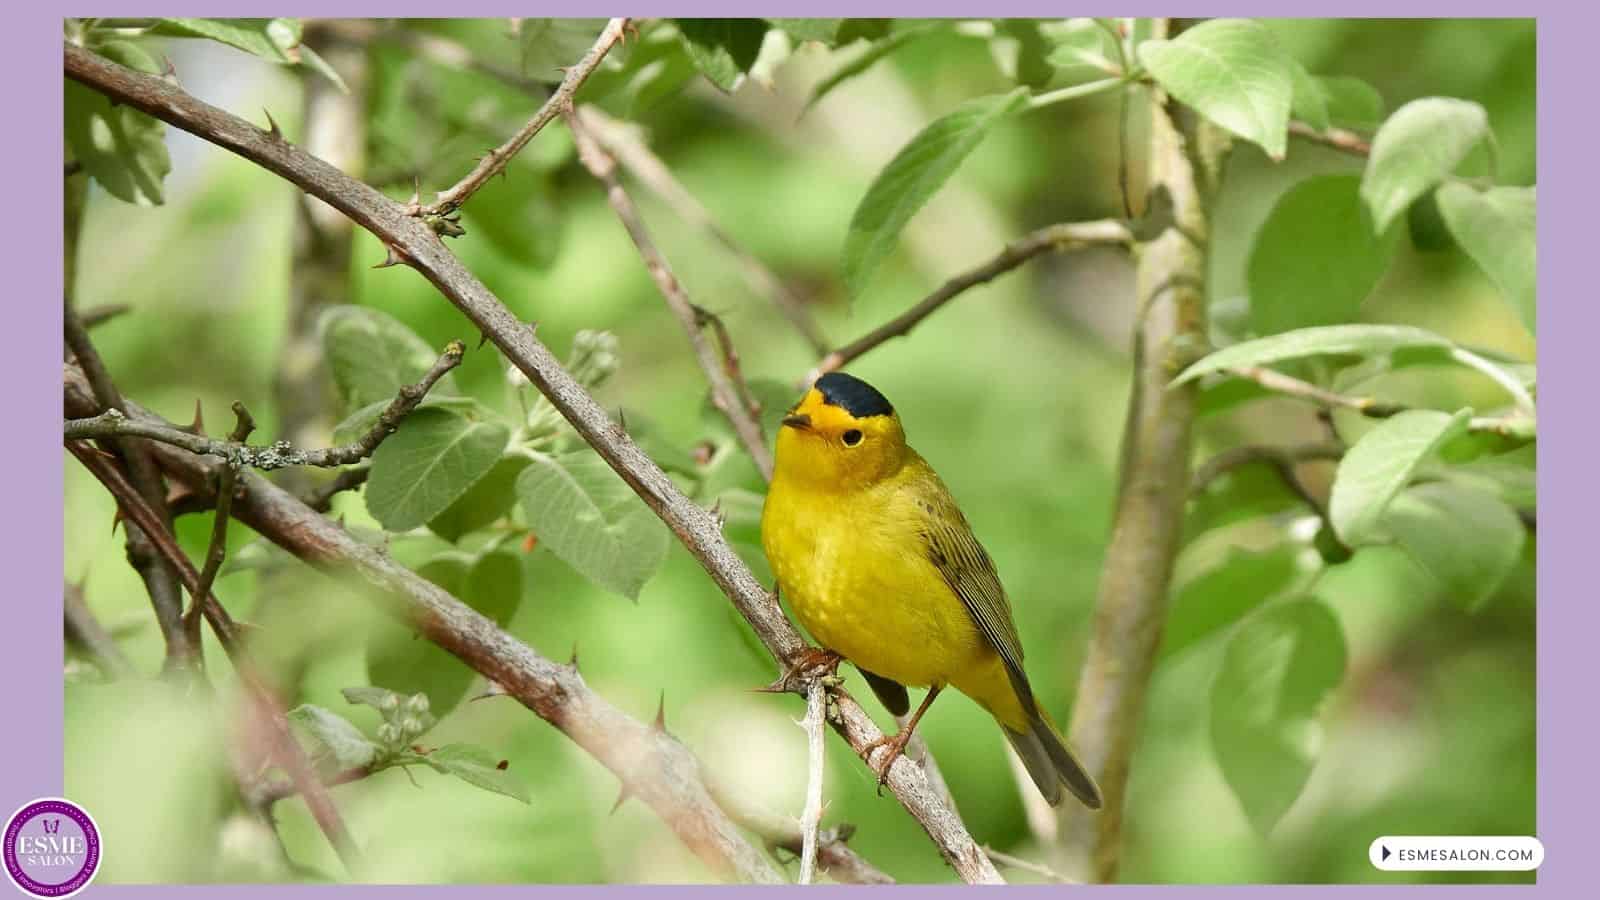 an image of a yellow bird in the tree a Wilson's Warbler